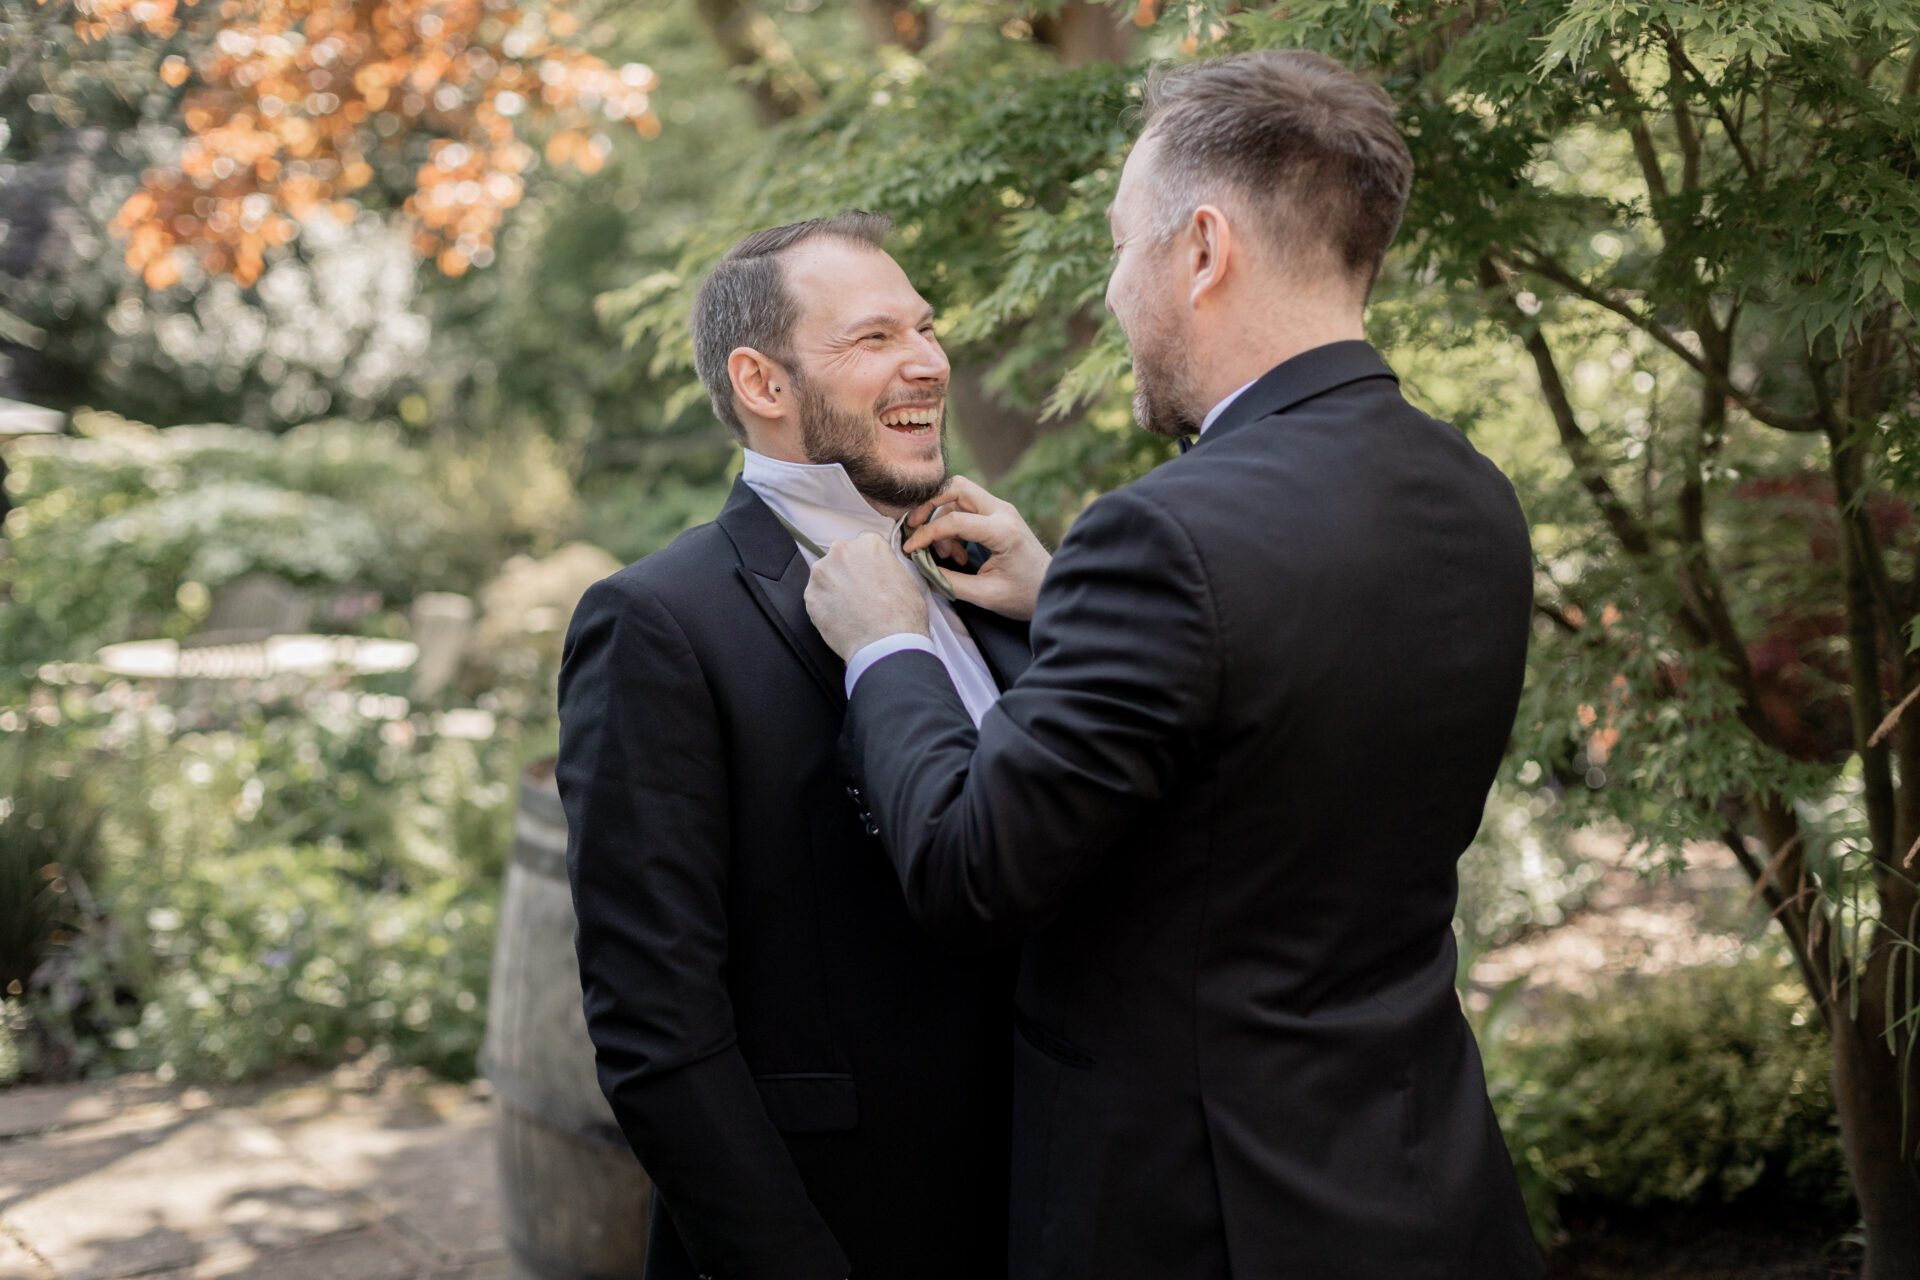 The best man helps the groom with his tie